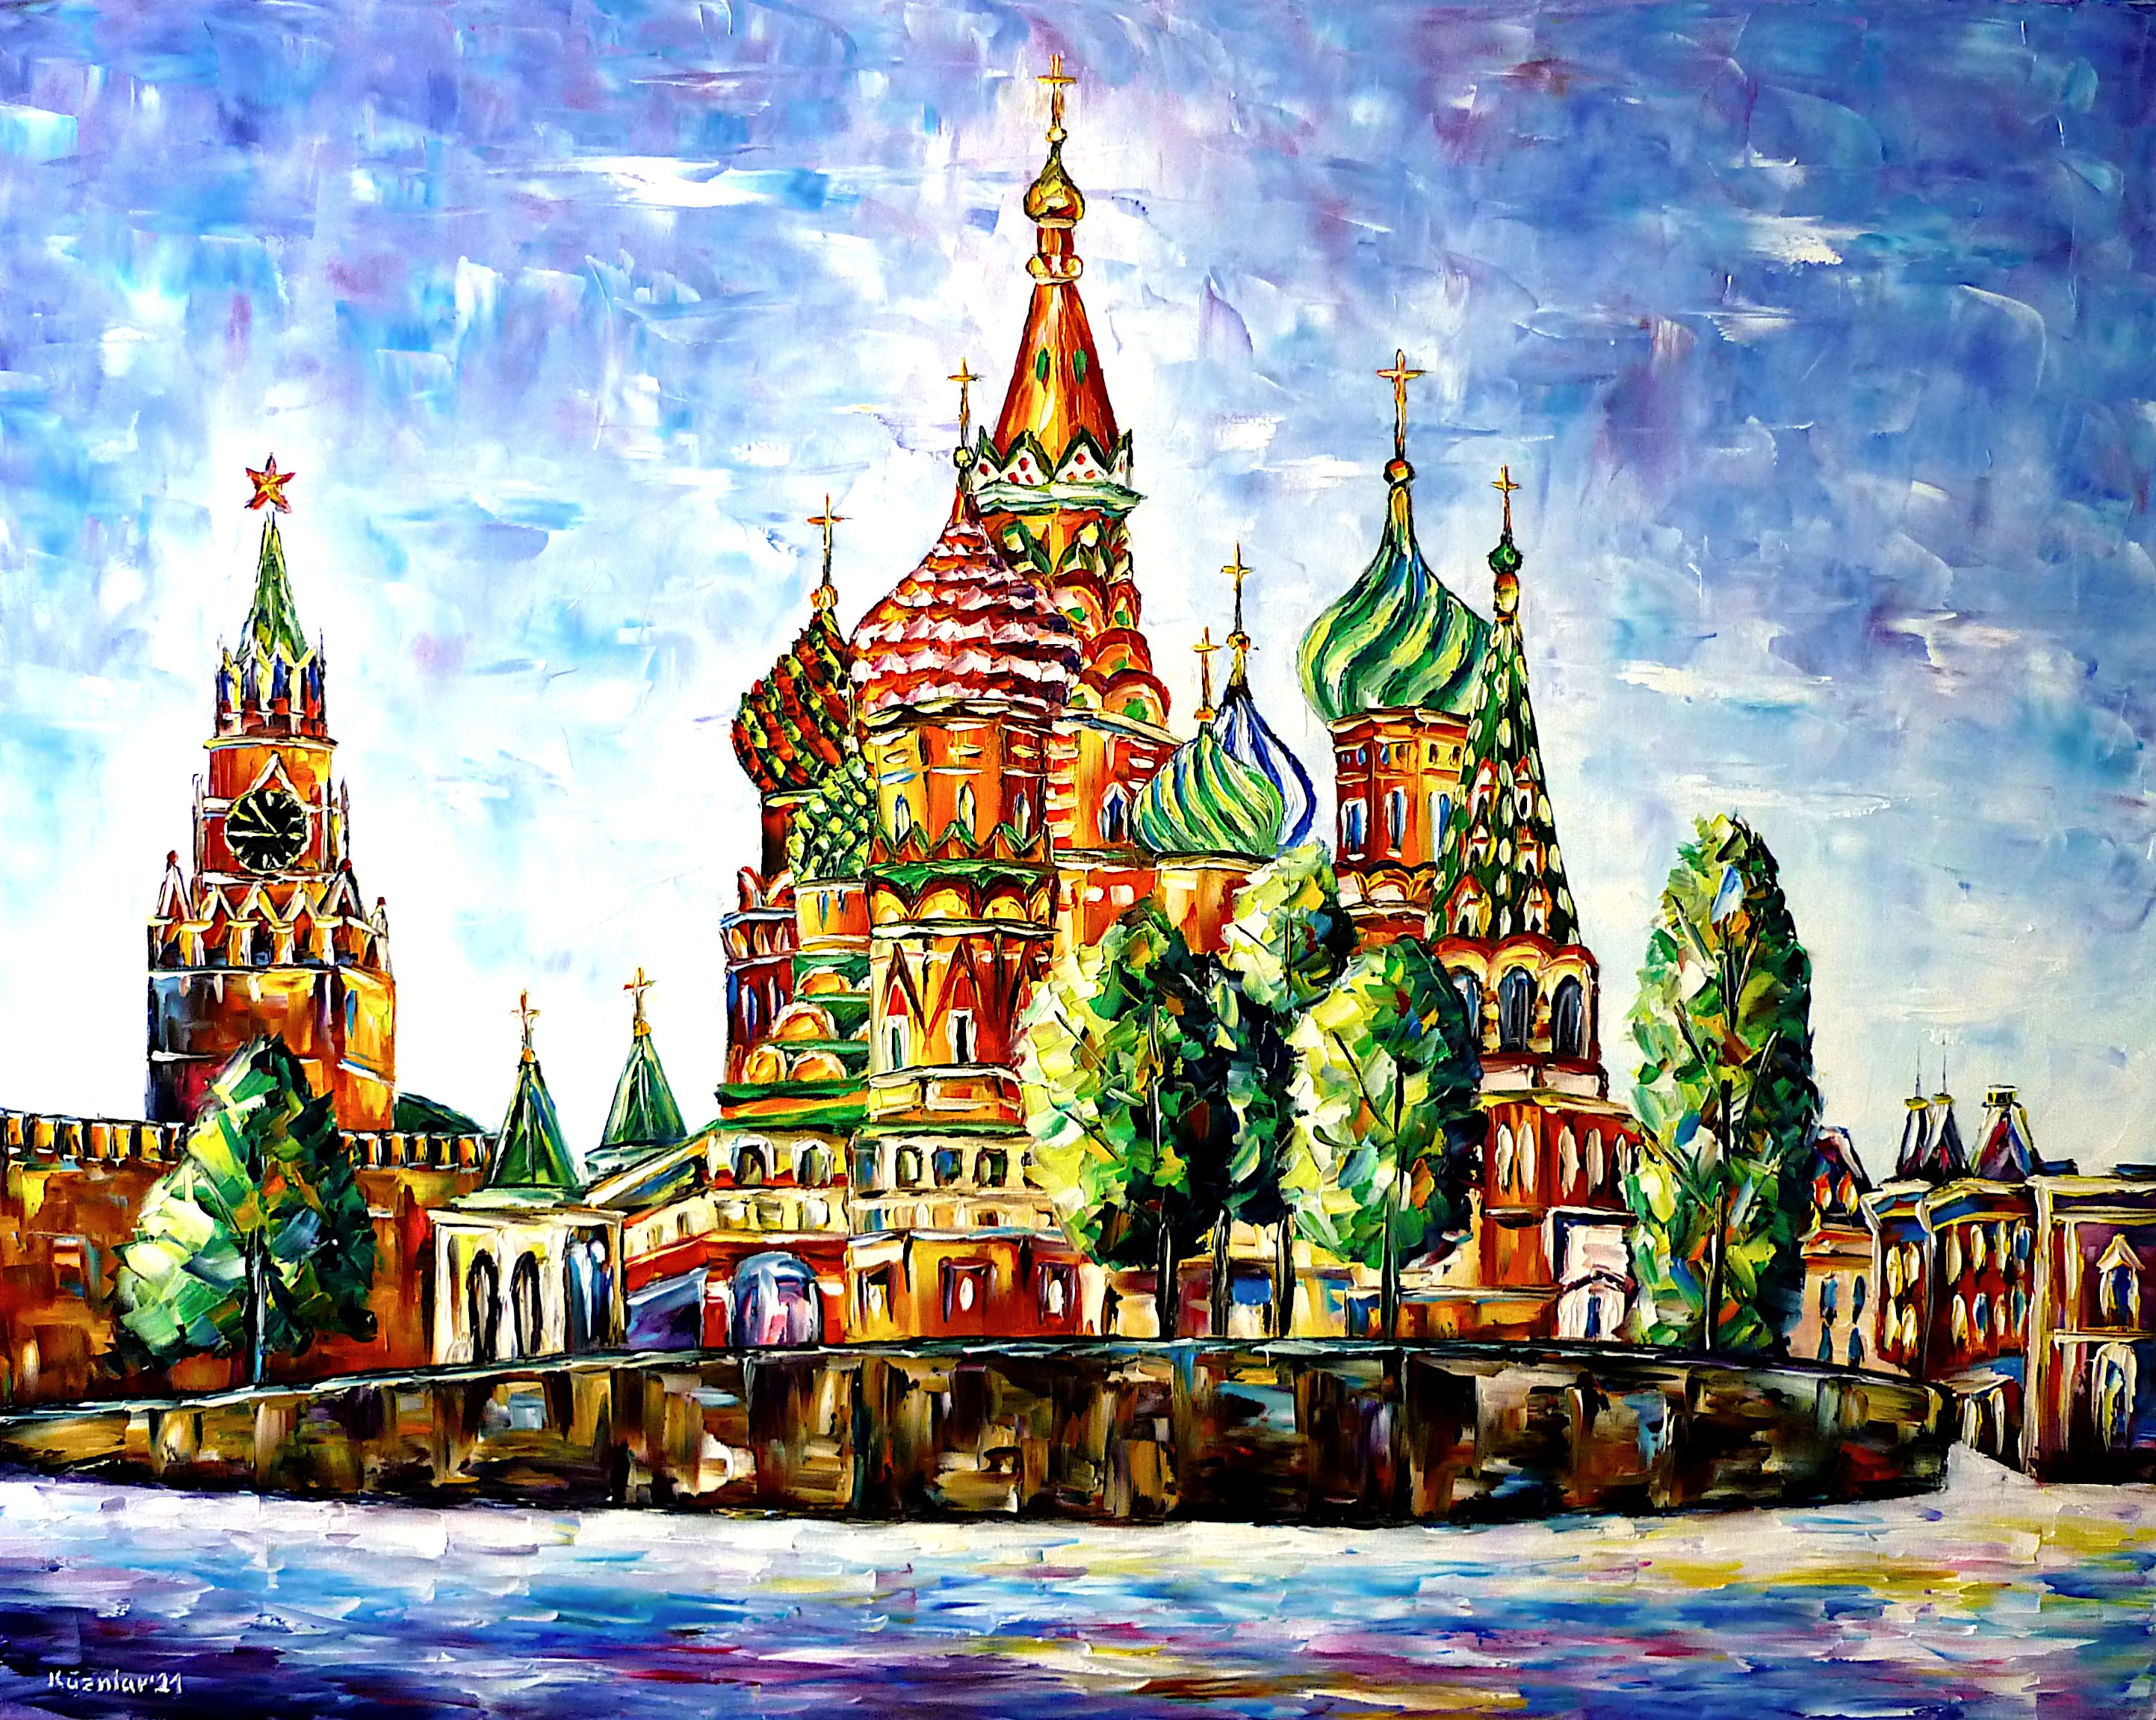 StBasilsCathedral,soborwasilijablaschennogo,churchinmoscow,moscowpicture,moscowpainting,moscowlove,moscowlovers,russianchurch,ilovemoscow,iloverussia,russialove,moscowredsquare,touristattraction,russia,russianculture,skyovermoscowcity,cityscape,cityscene,motherrussia,brightpainting,peacefulpainting,cheerfulpainting,friendlyscene,friendlypainting,paletteknifeoilpainting,modernart,impressionism,artdeco,abstractpainting,livelypainting,colorfulpainting,livelycolours,brightcolors,lightreflections,impastopainting,livingroompainting,livingroomart